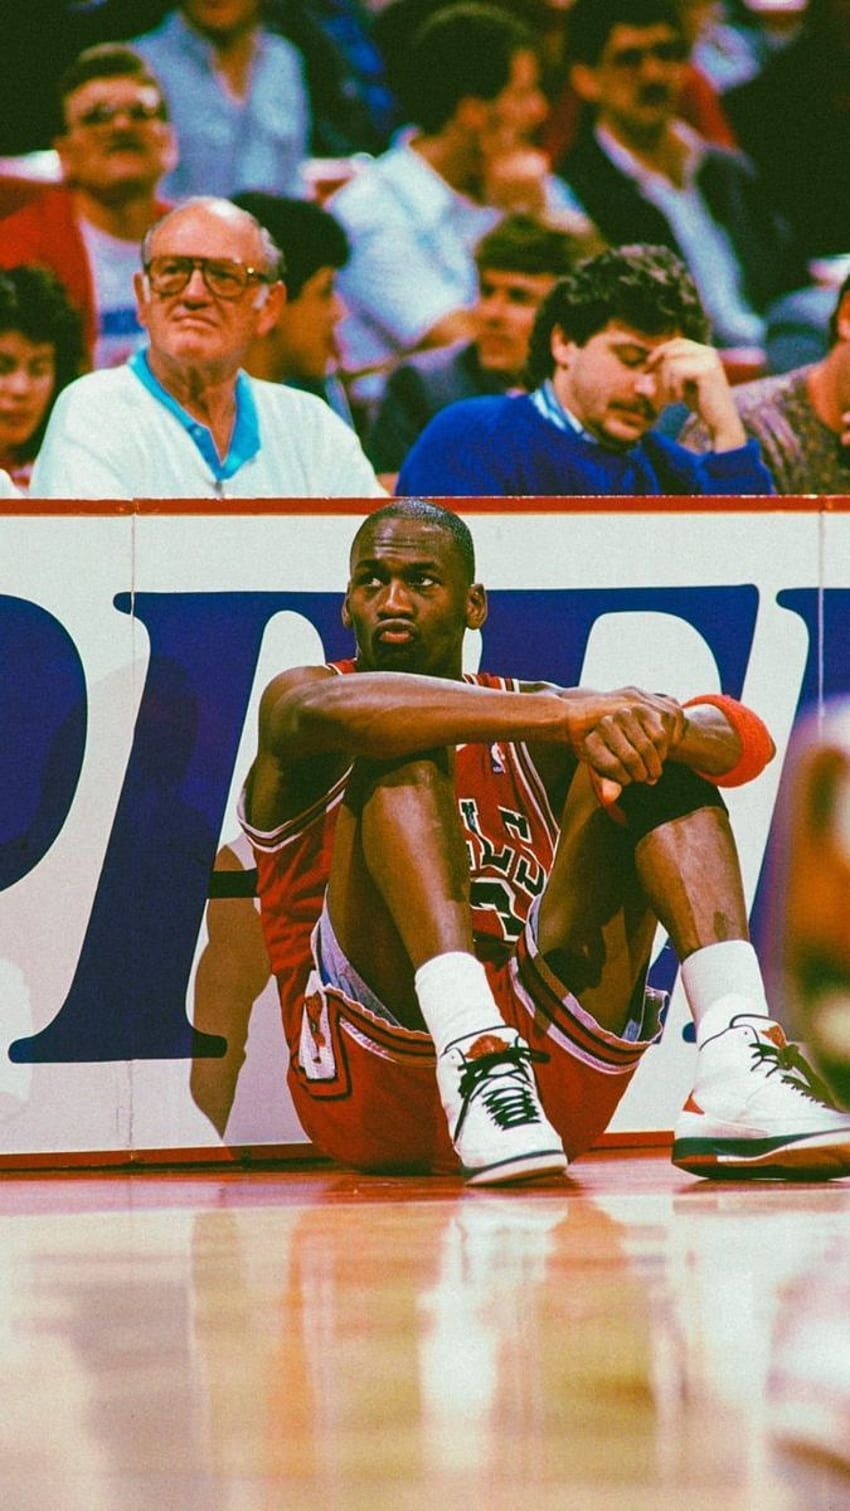 A basketball player sitting on the floor of an arena - NBA